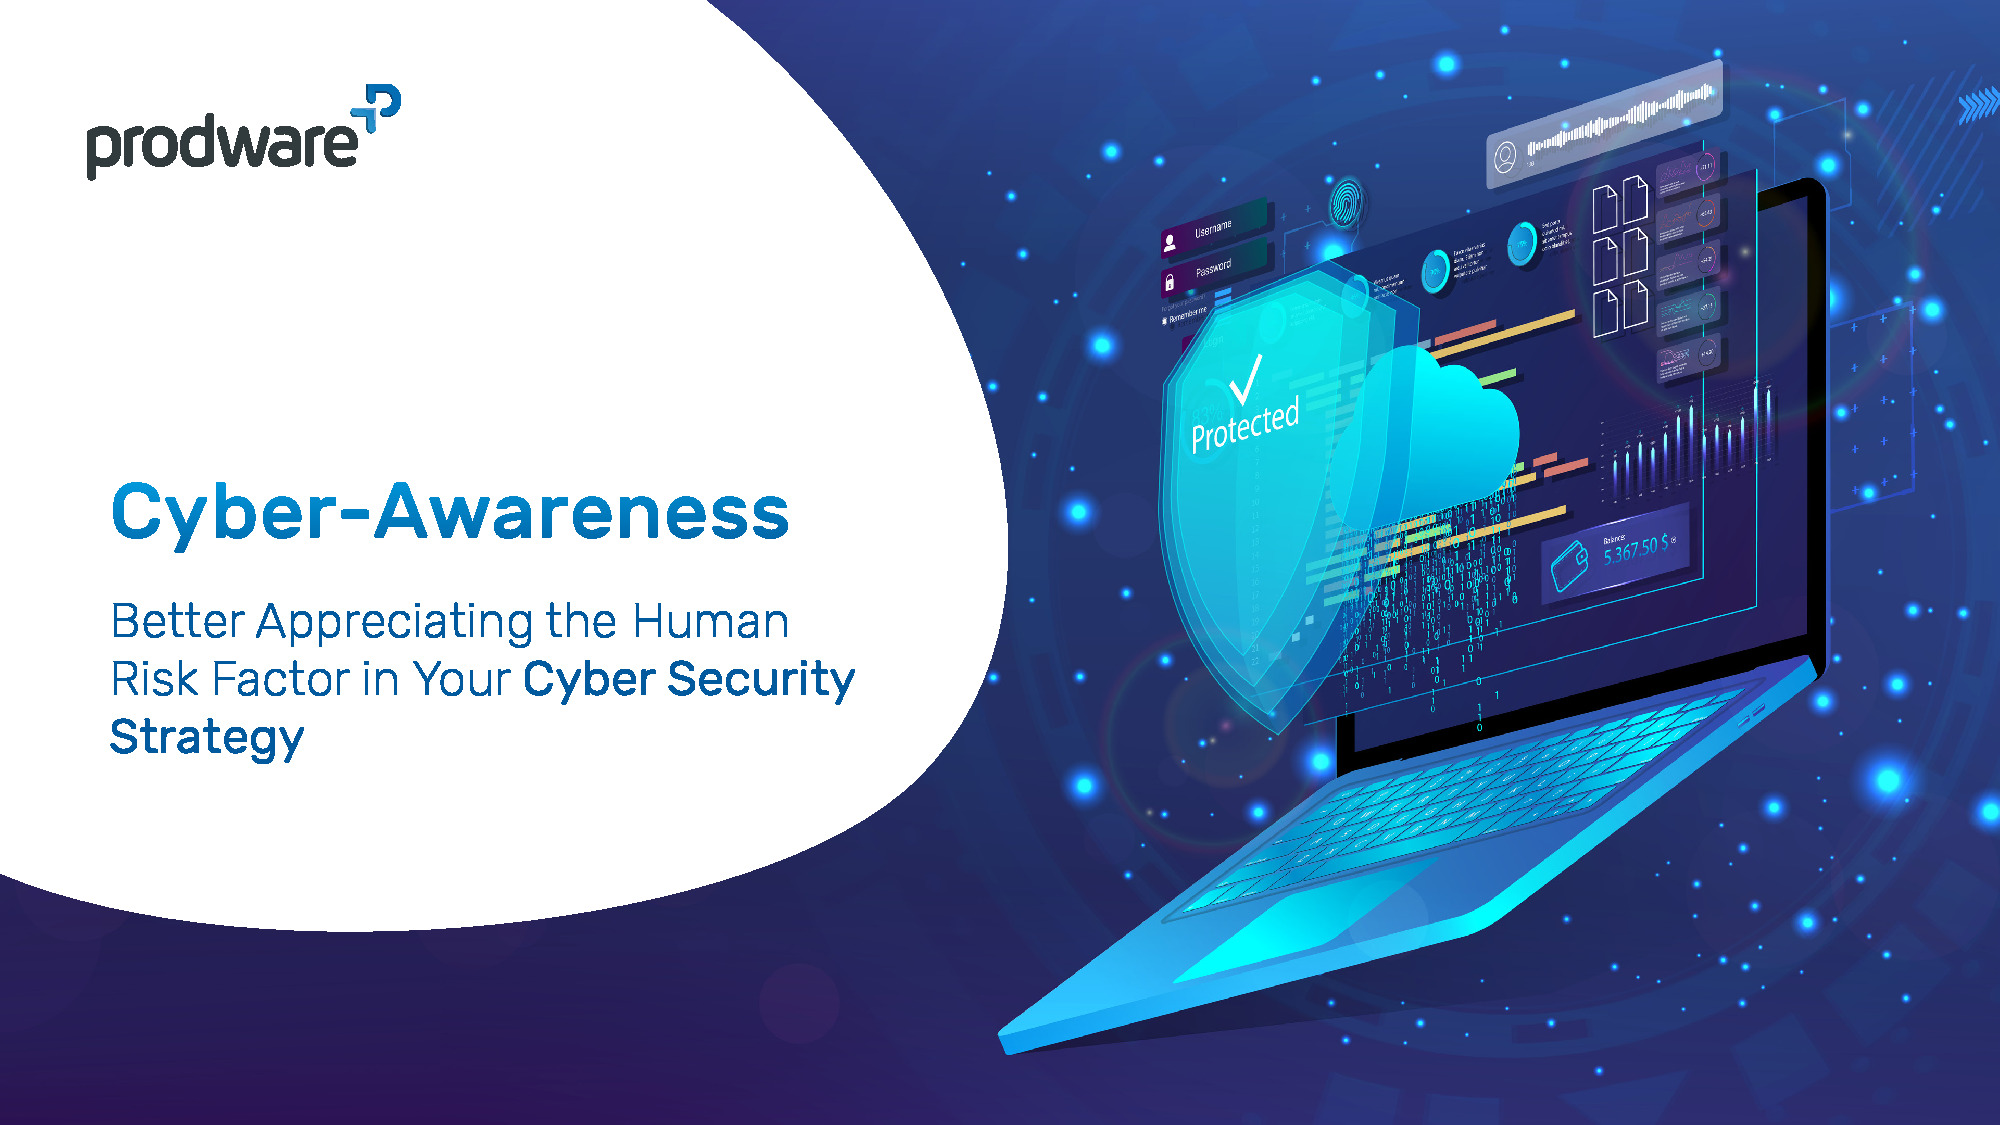 Cyber Awareness: Better Appreciating the Human Risk Factor in Your Cyber Security Strategy